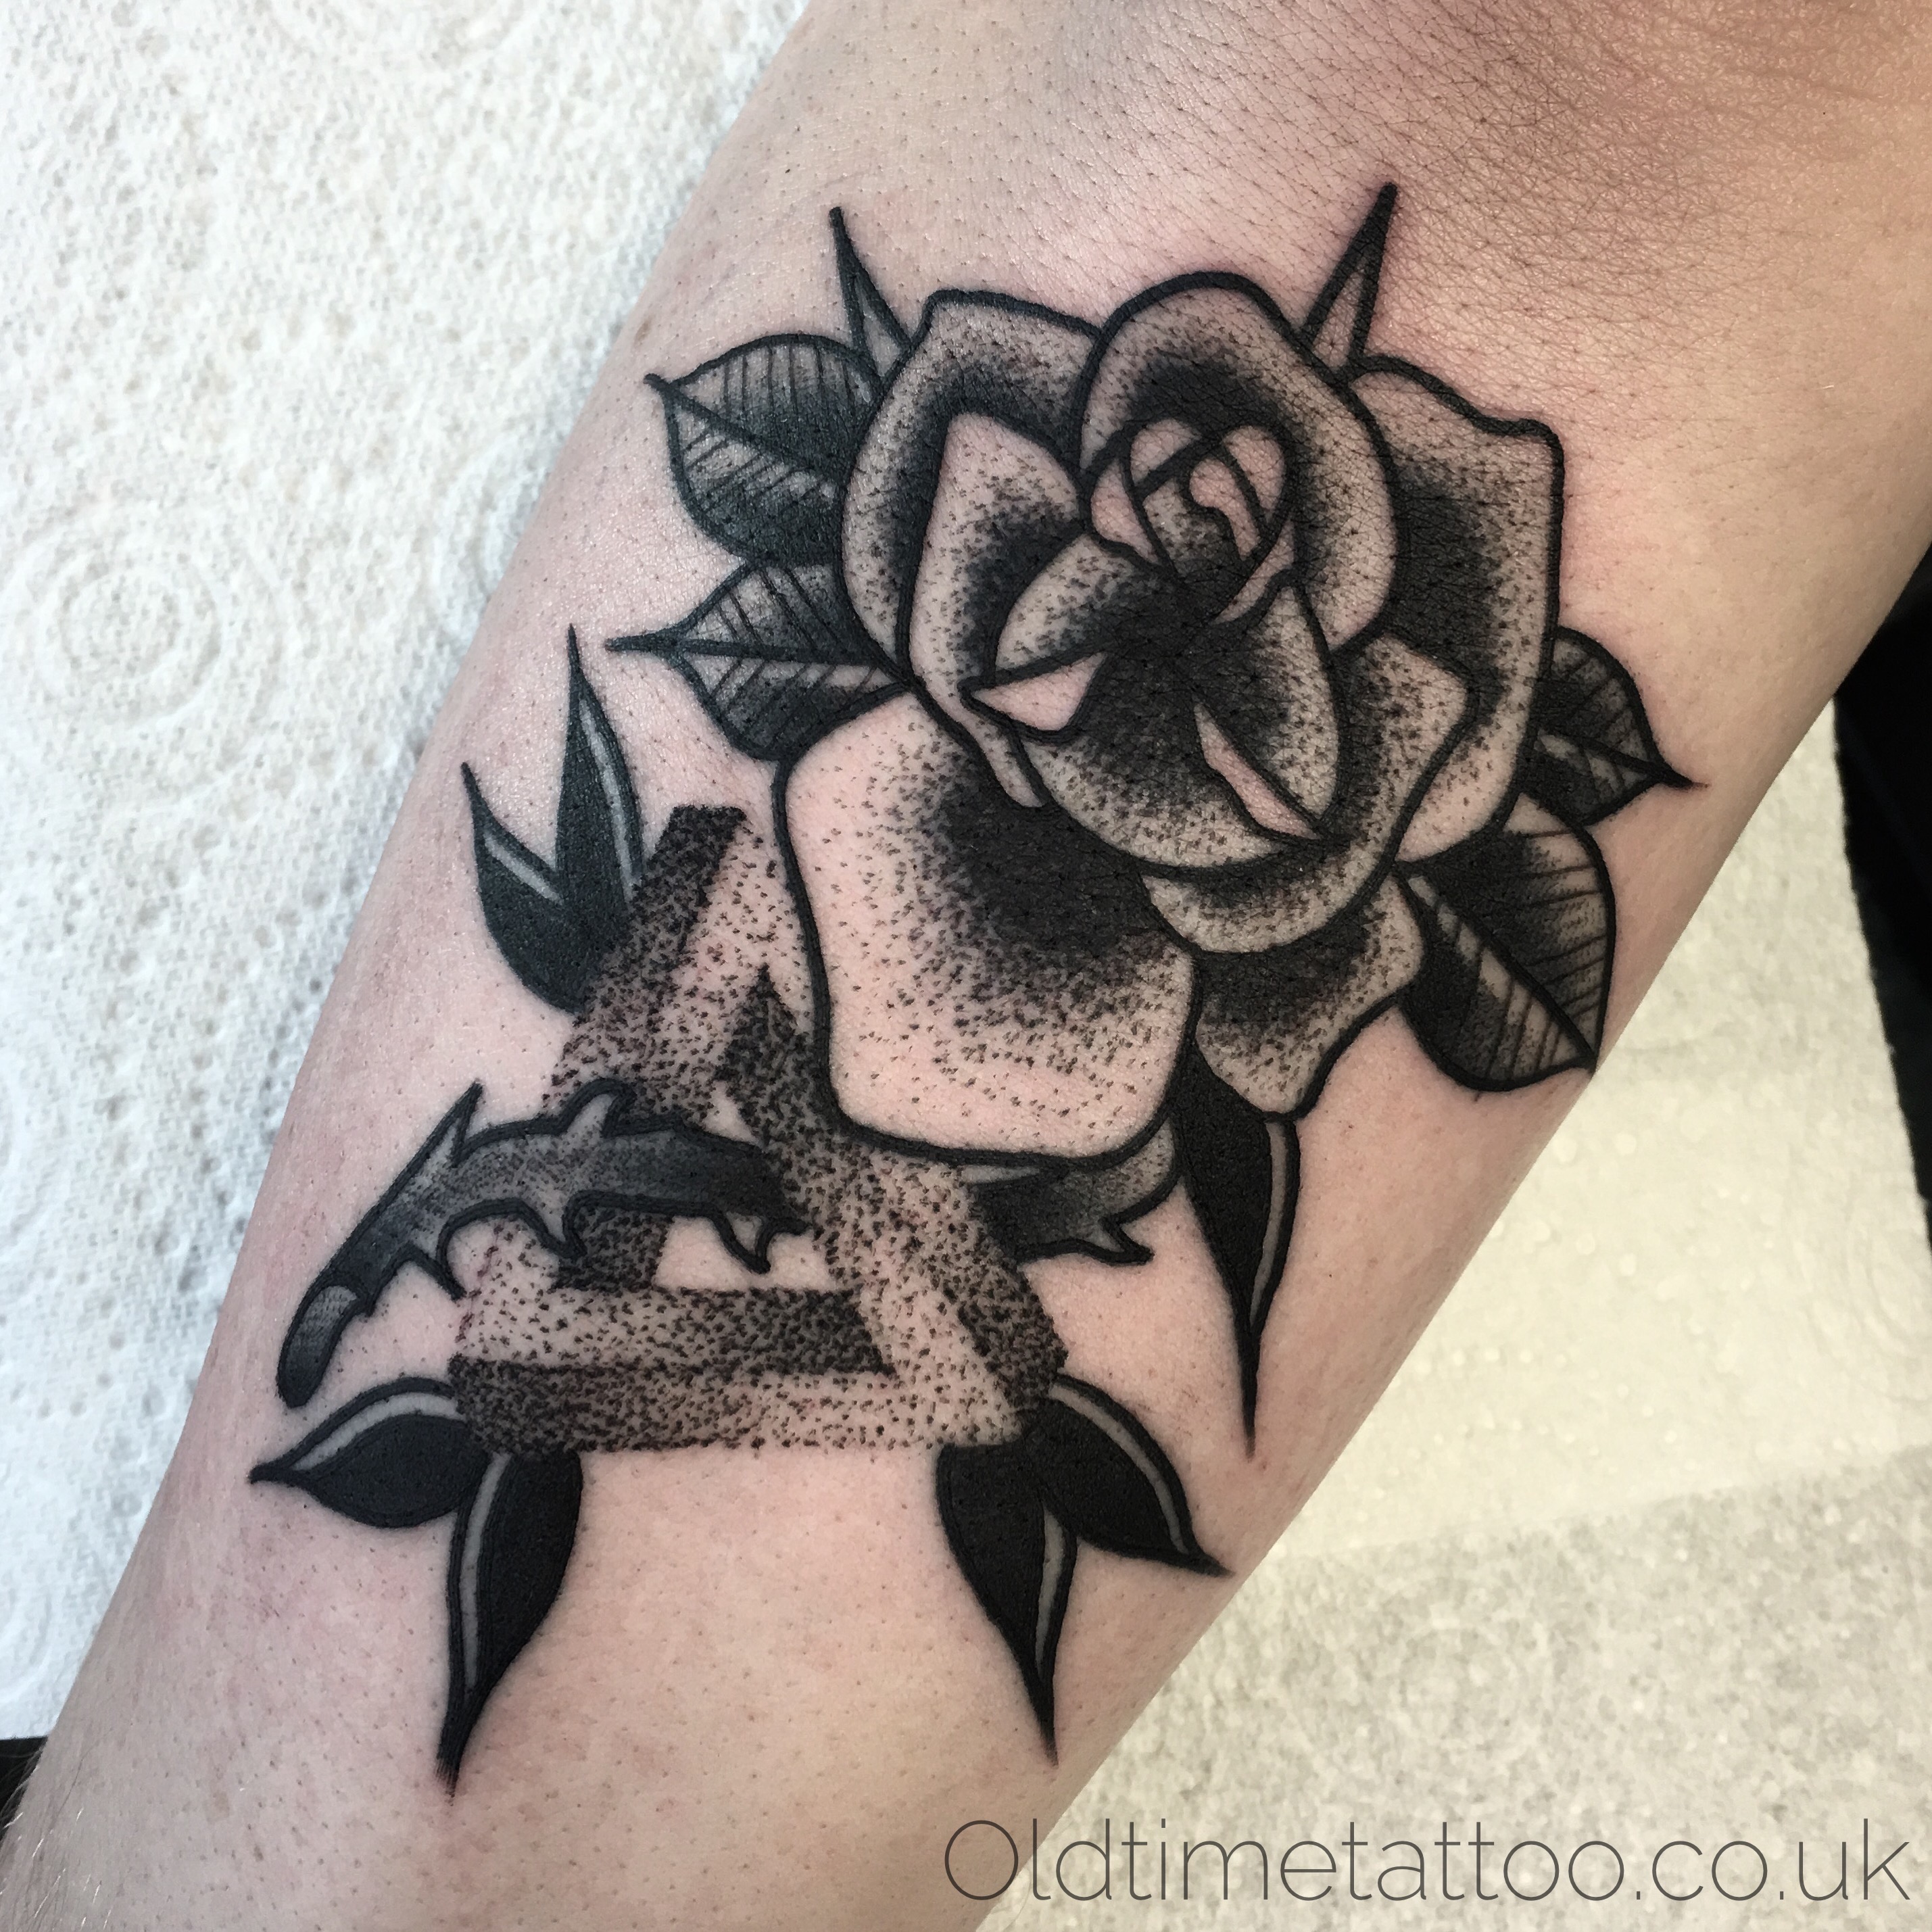 Dotwork Penrose Triangle Tattoo on the Bicep